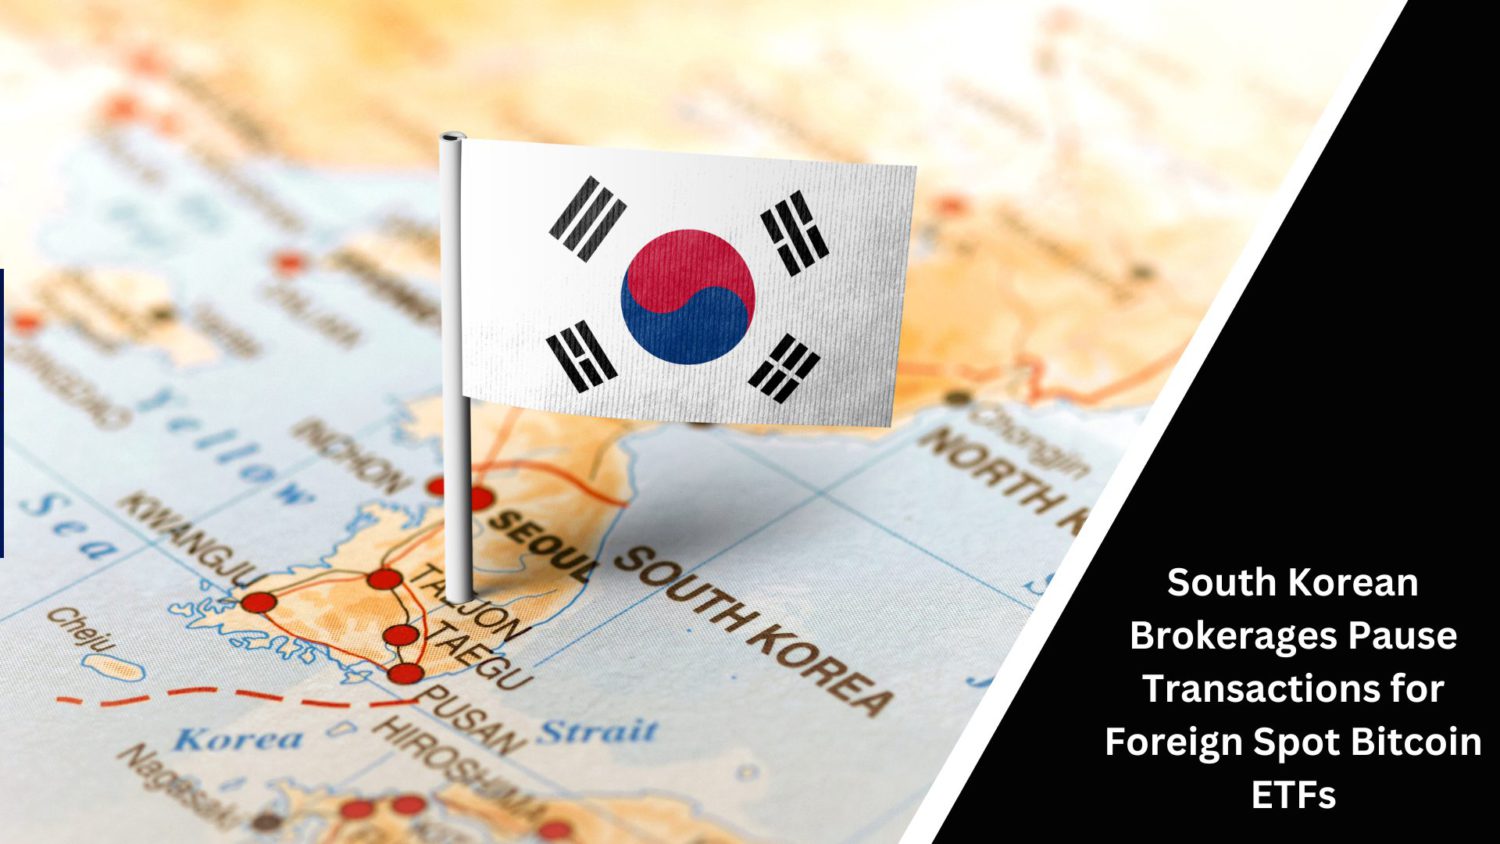 South Korean Brokerages Pause Transactions For Foreign Spot Bitcoin Etfs